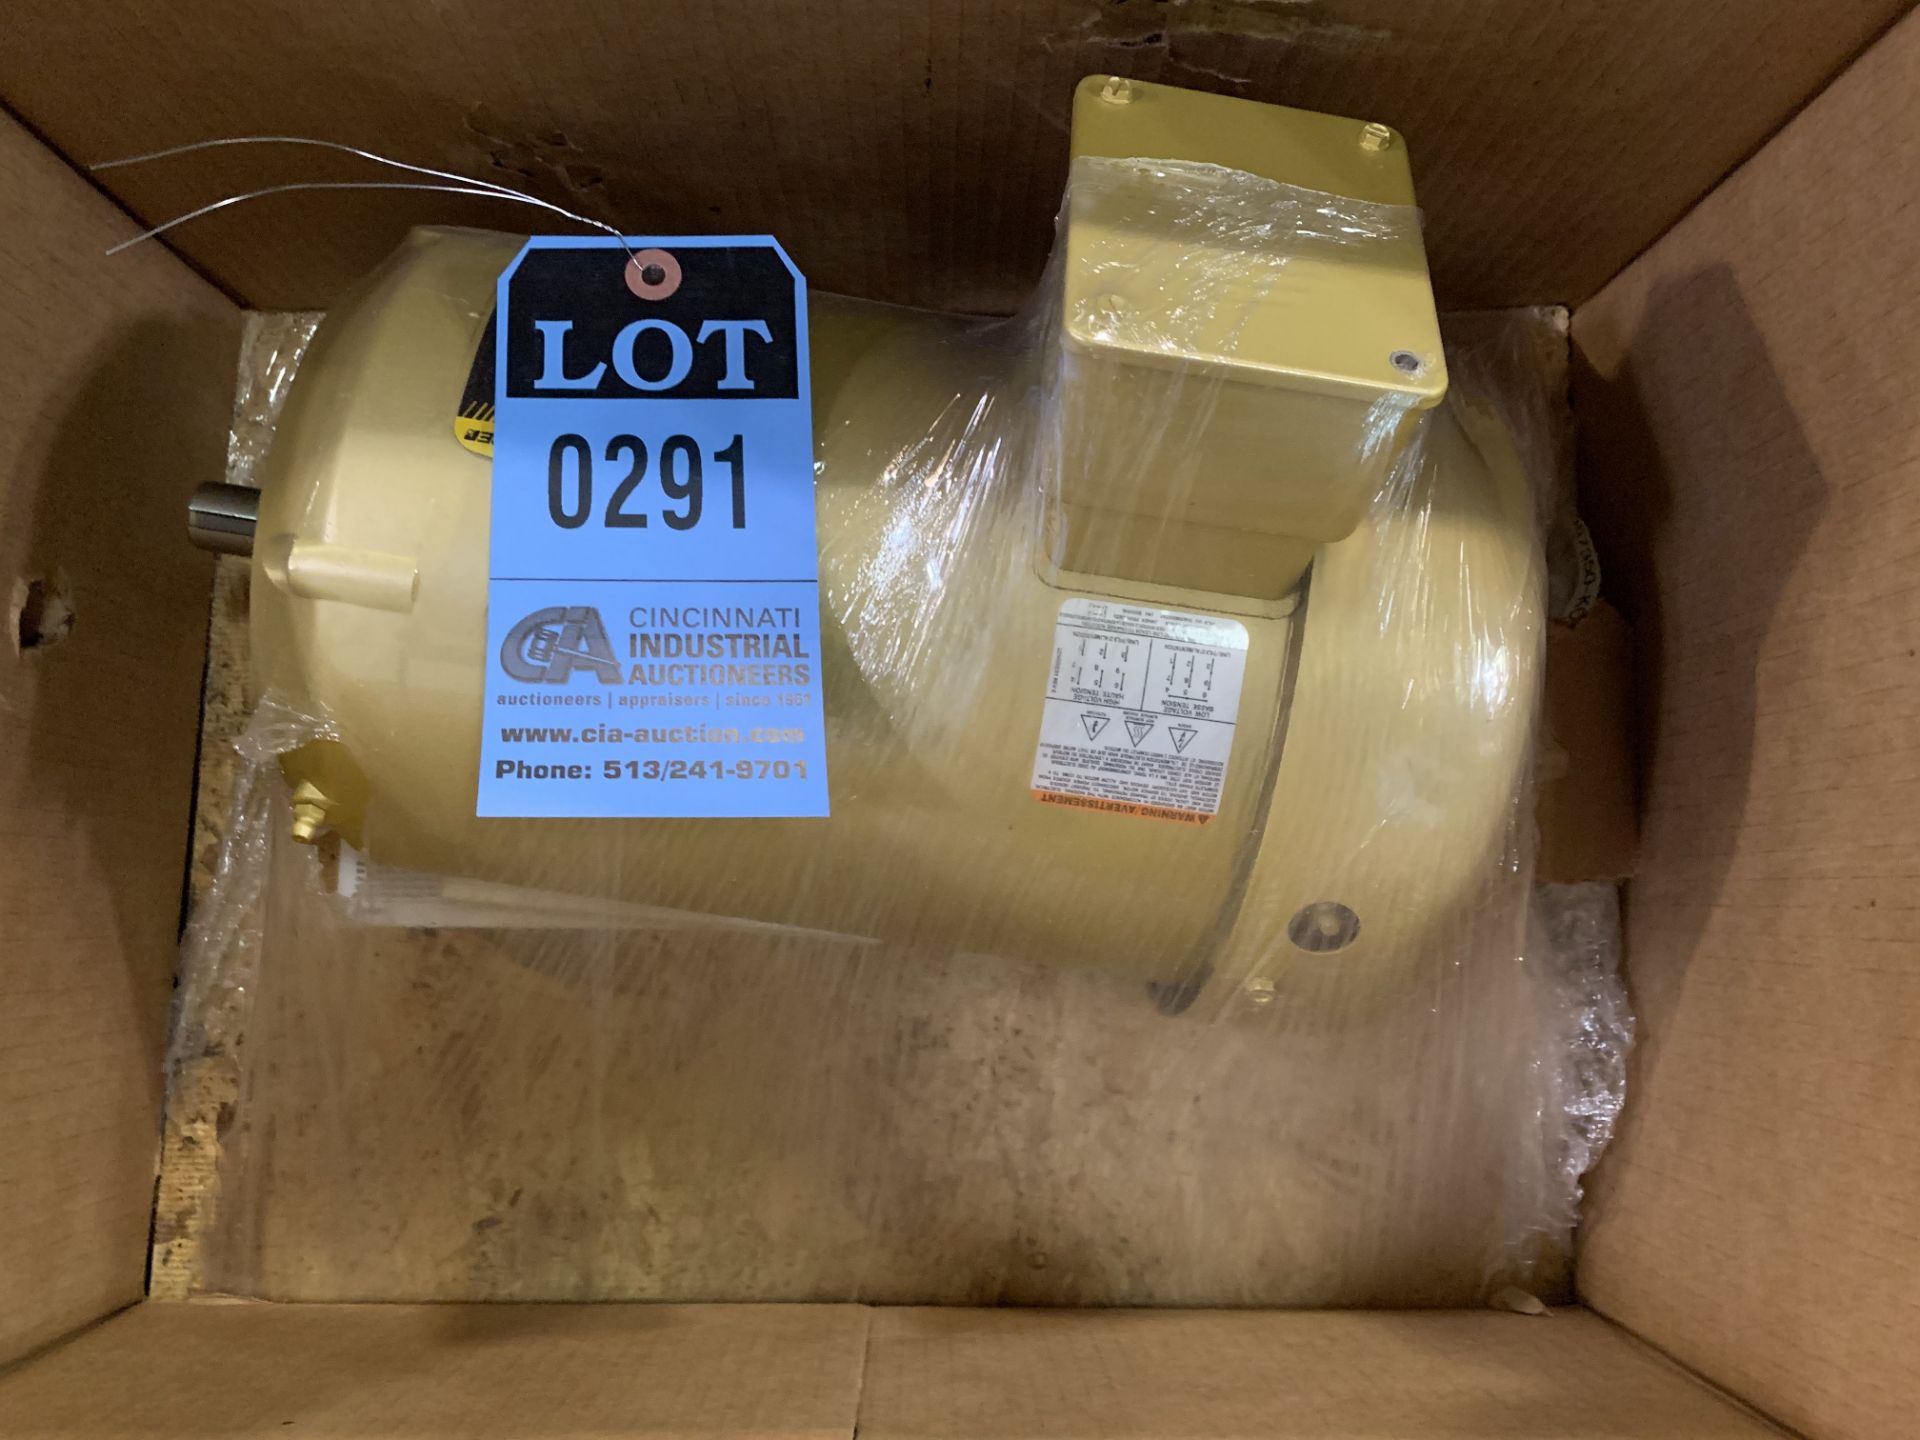 3 HP BALDOR ELECTRIC MOTOR - NEW **LOCATED AT 1711 KIMBERLY PARK DRIVE**